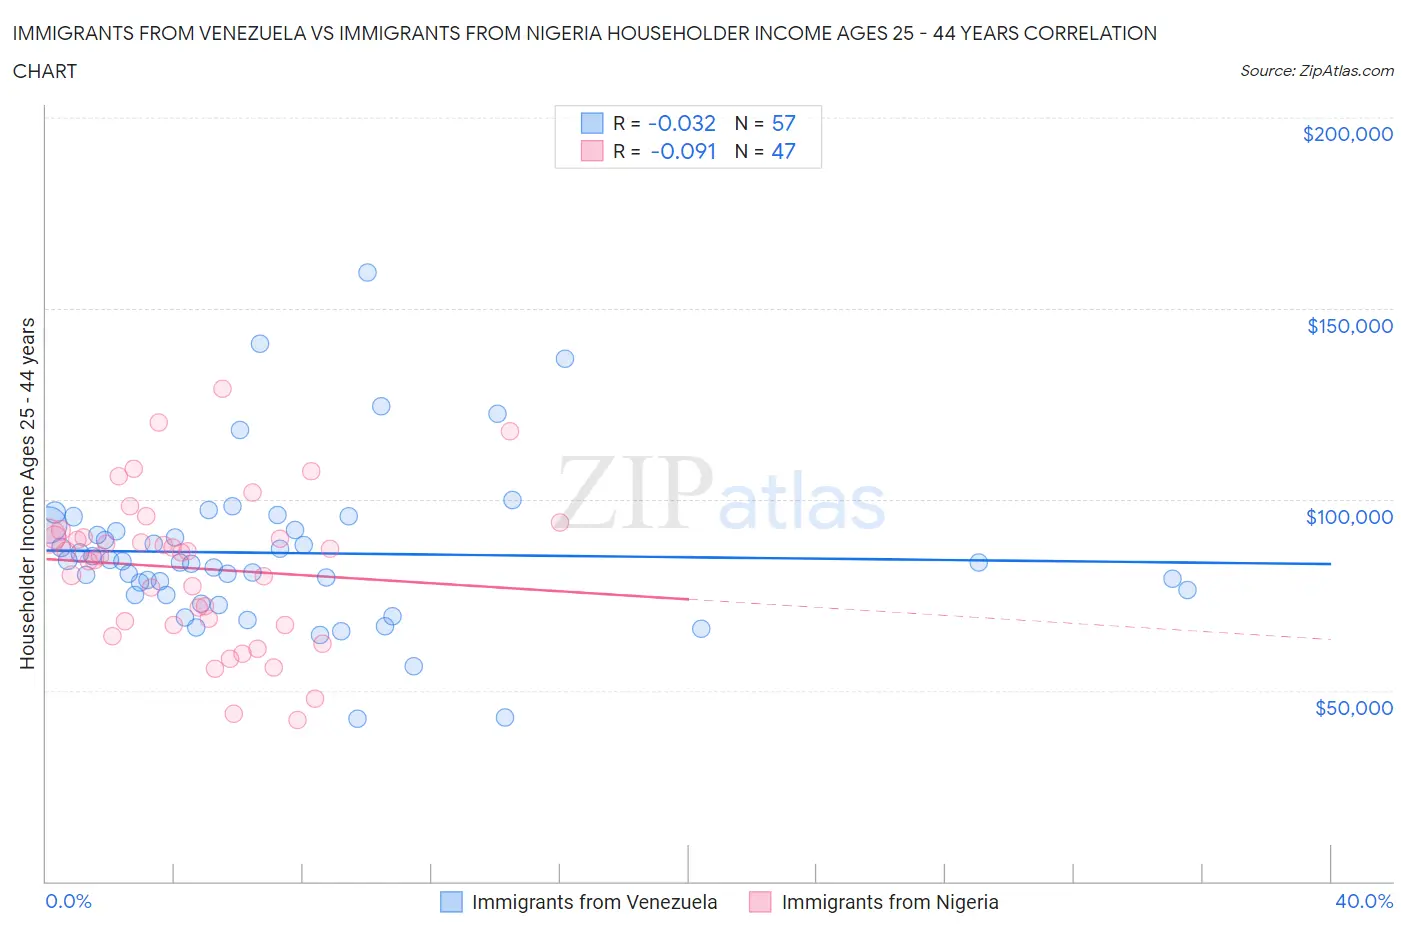 Immigrants from Venezuela vs Immigrants from Nigeria Householder Income Ages 25 - 44 years